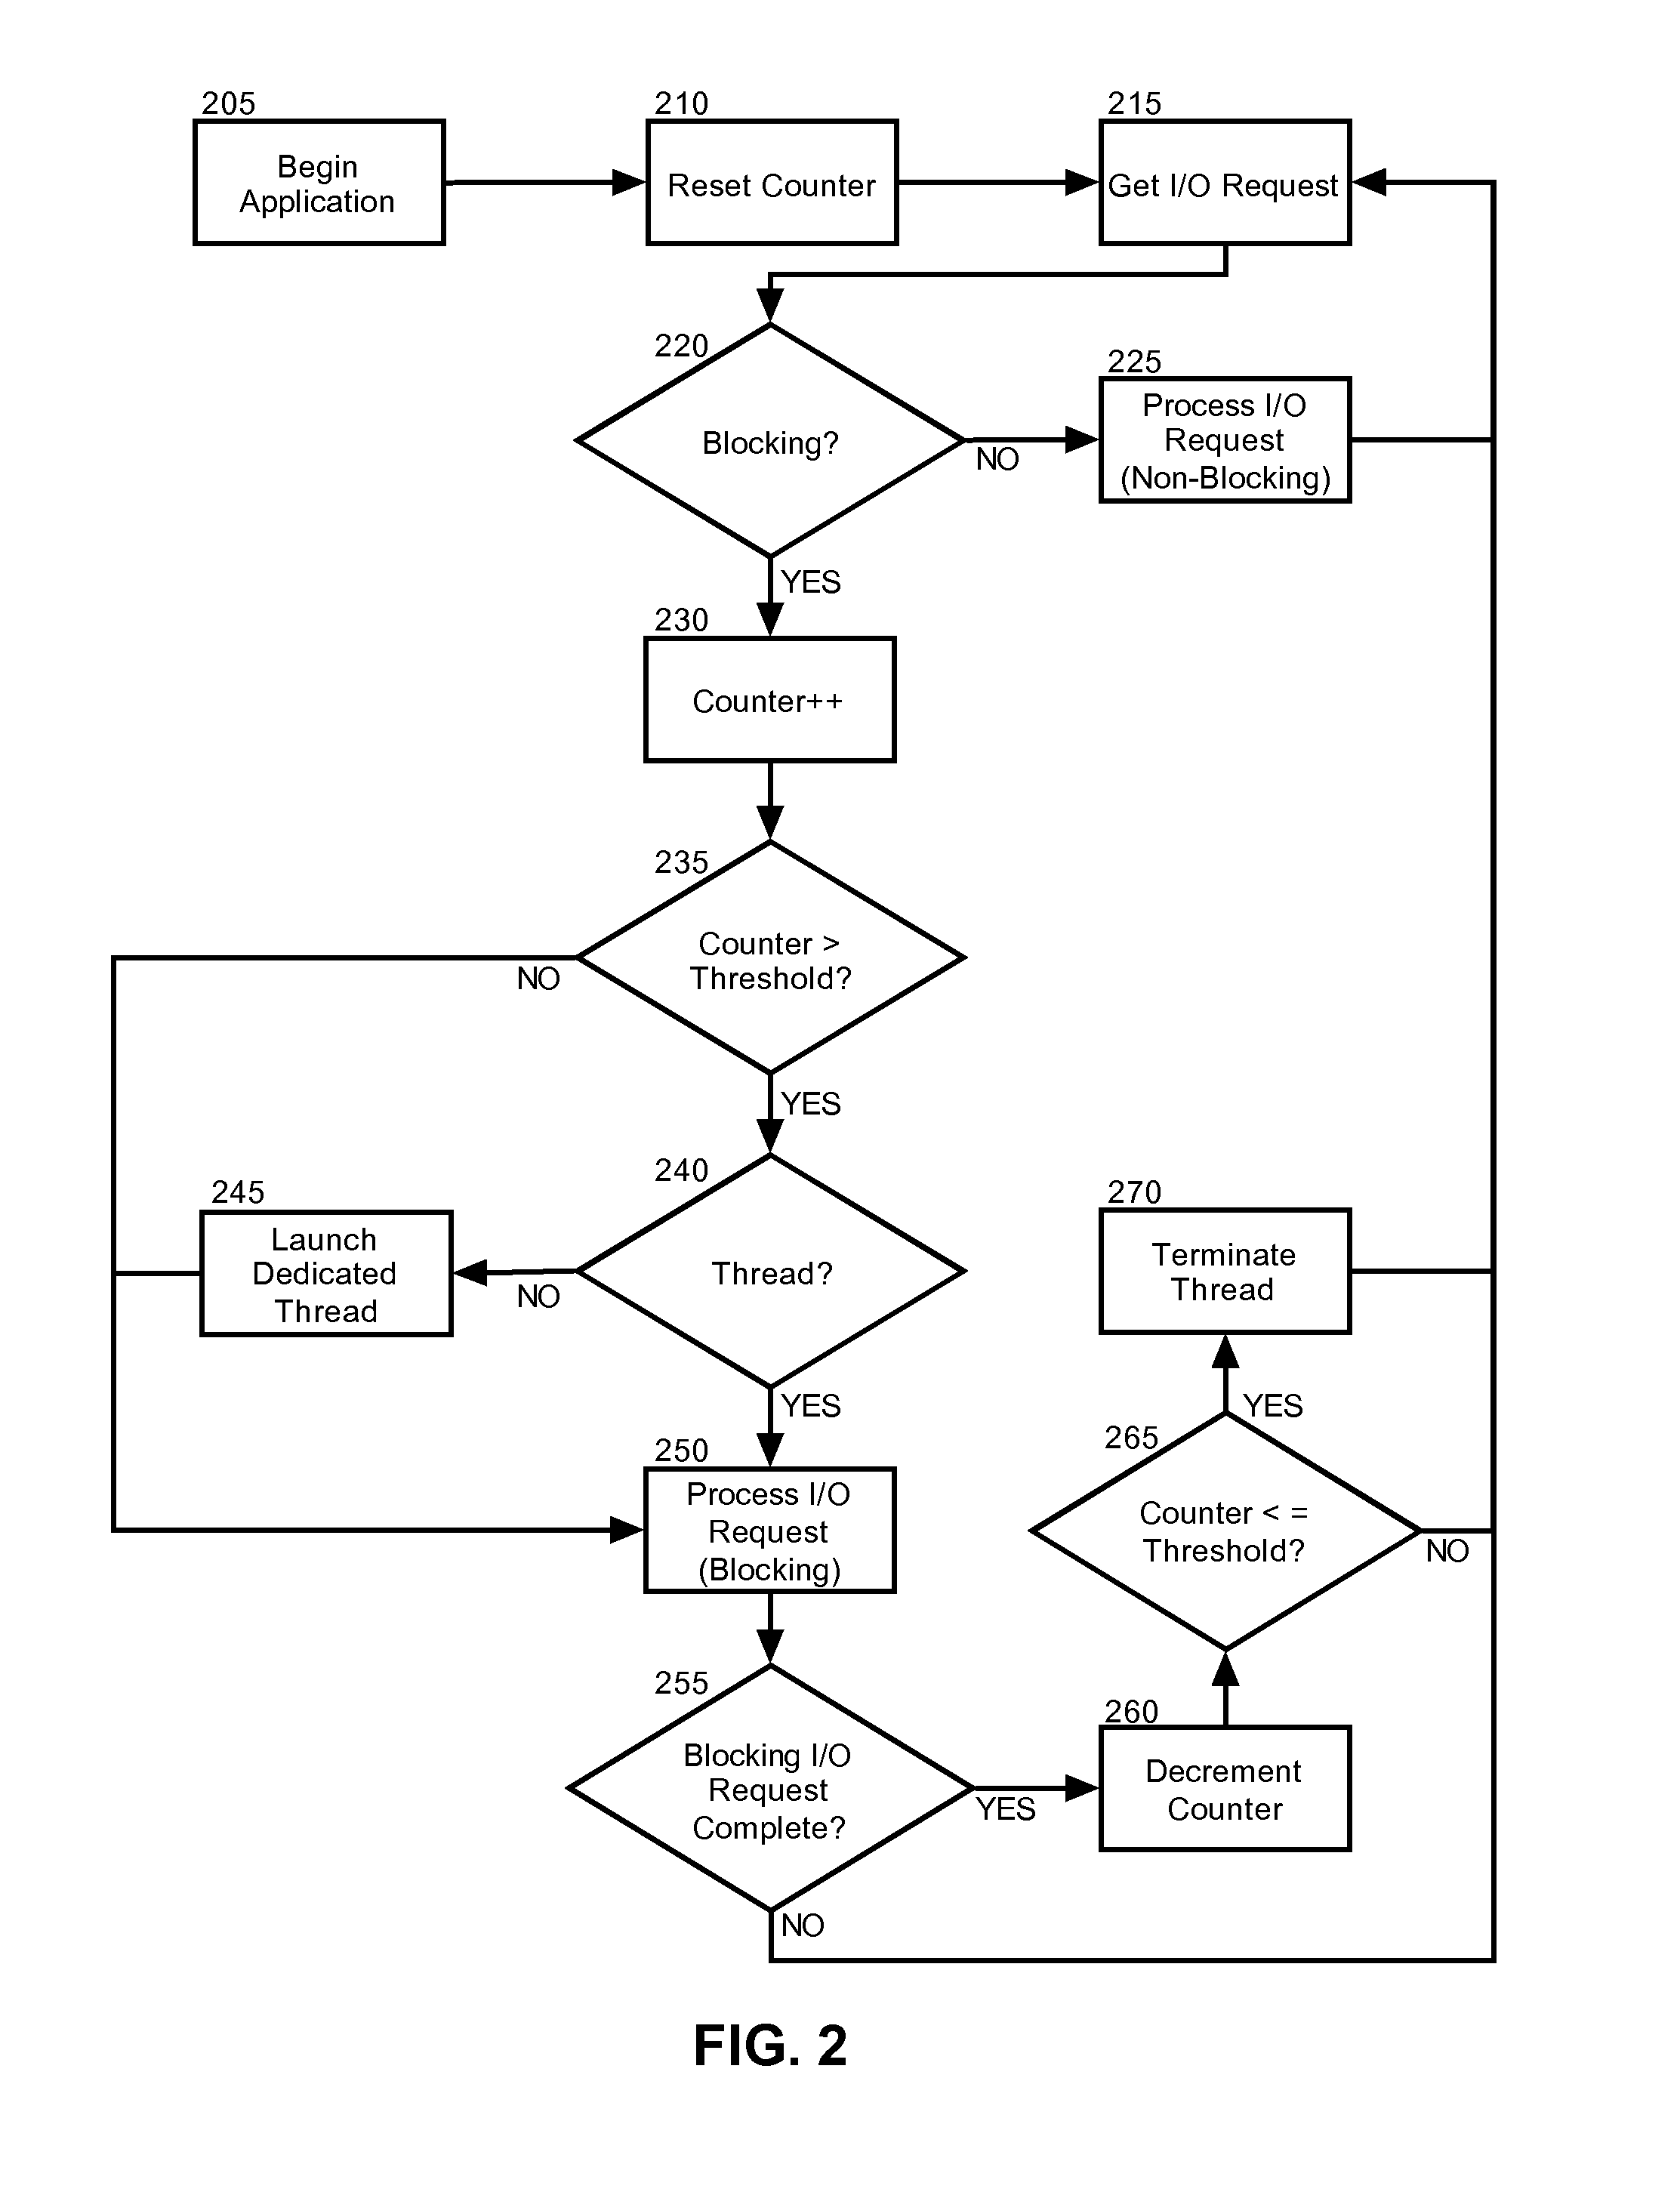 Autonomic threading model switch based on input/output request type